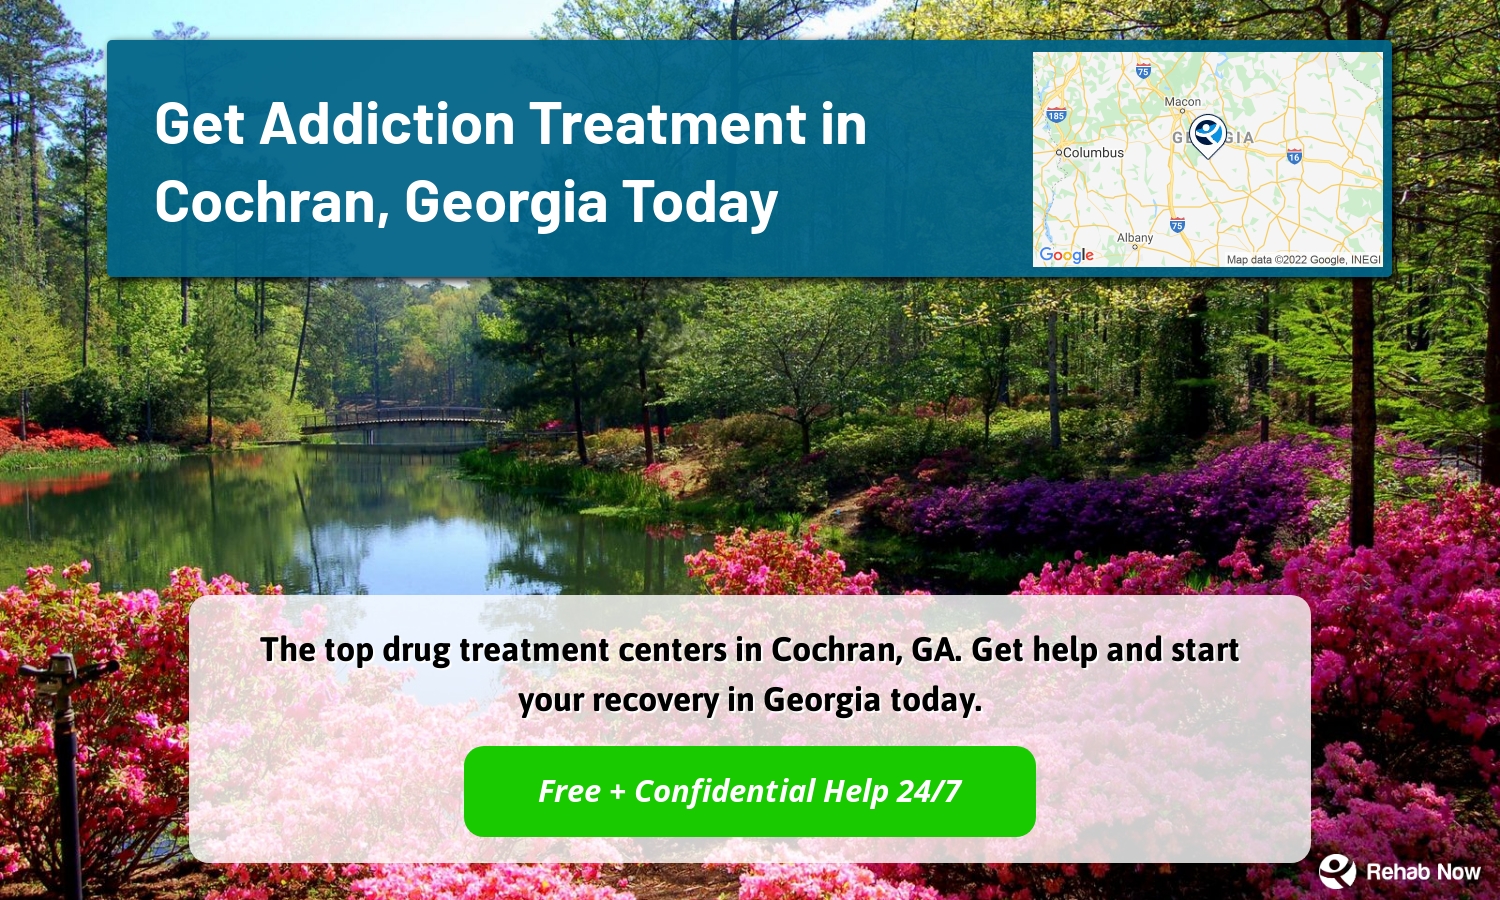 The top drug treatment centers in Cochran, GA. Get help and start your recovery in Georgia today.